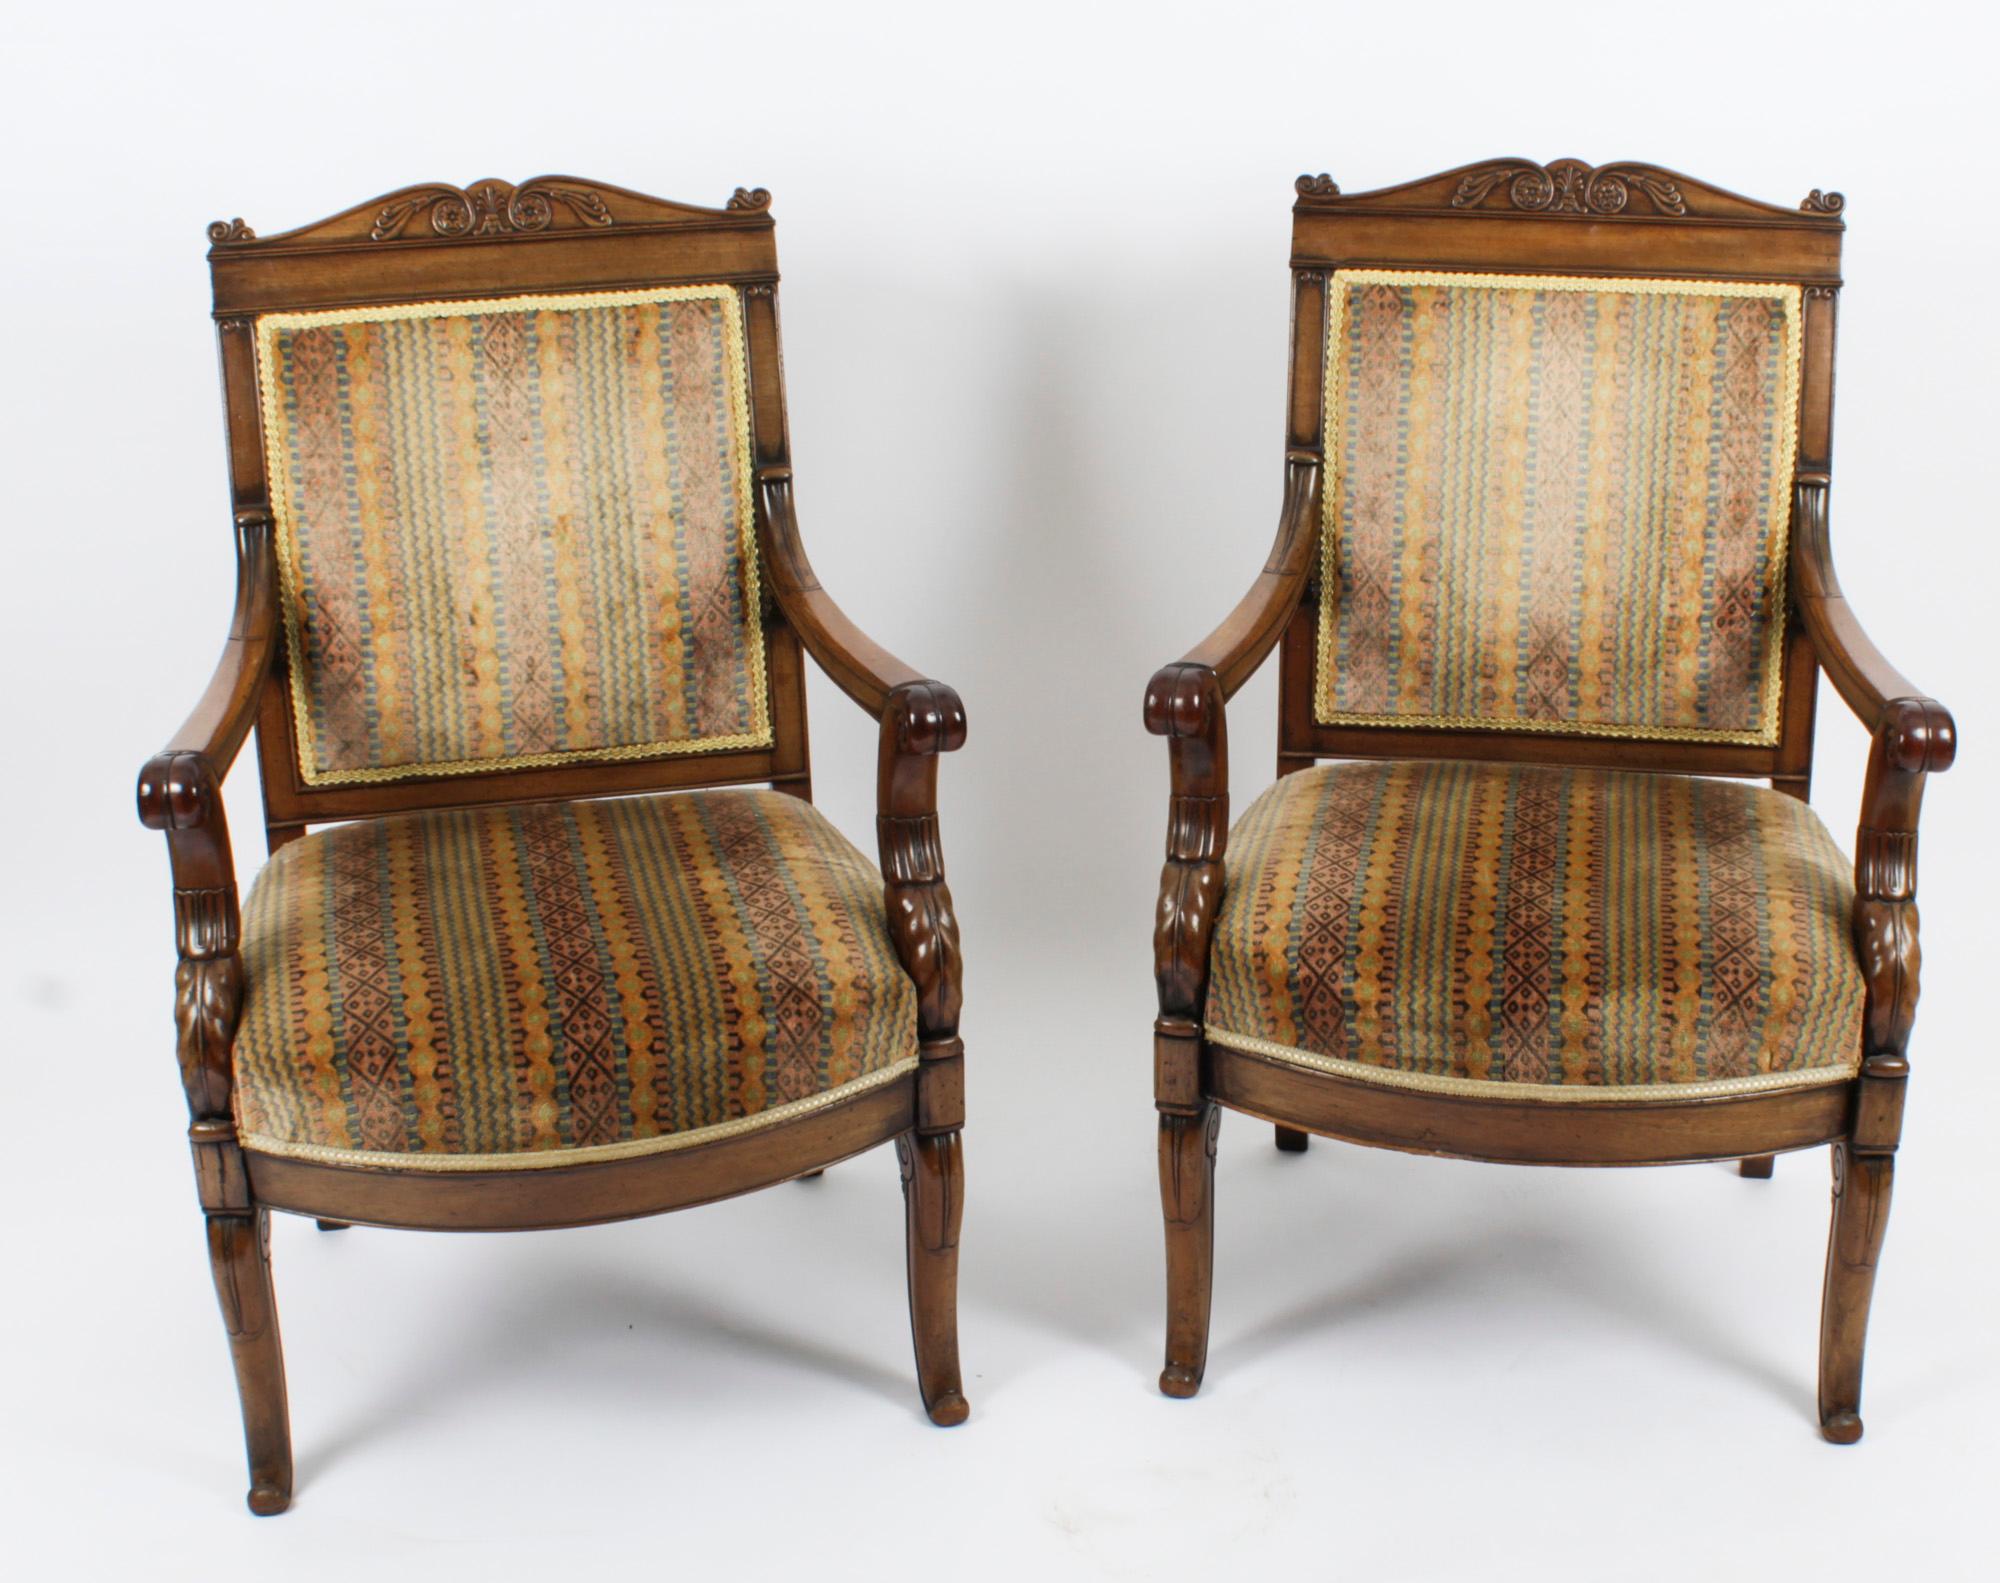 Antique Pair French Empire Armchair Fauteuils Chairs, 19th Century For Sale 10